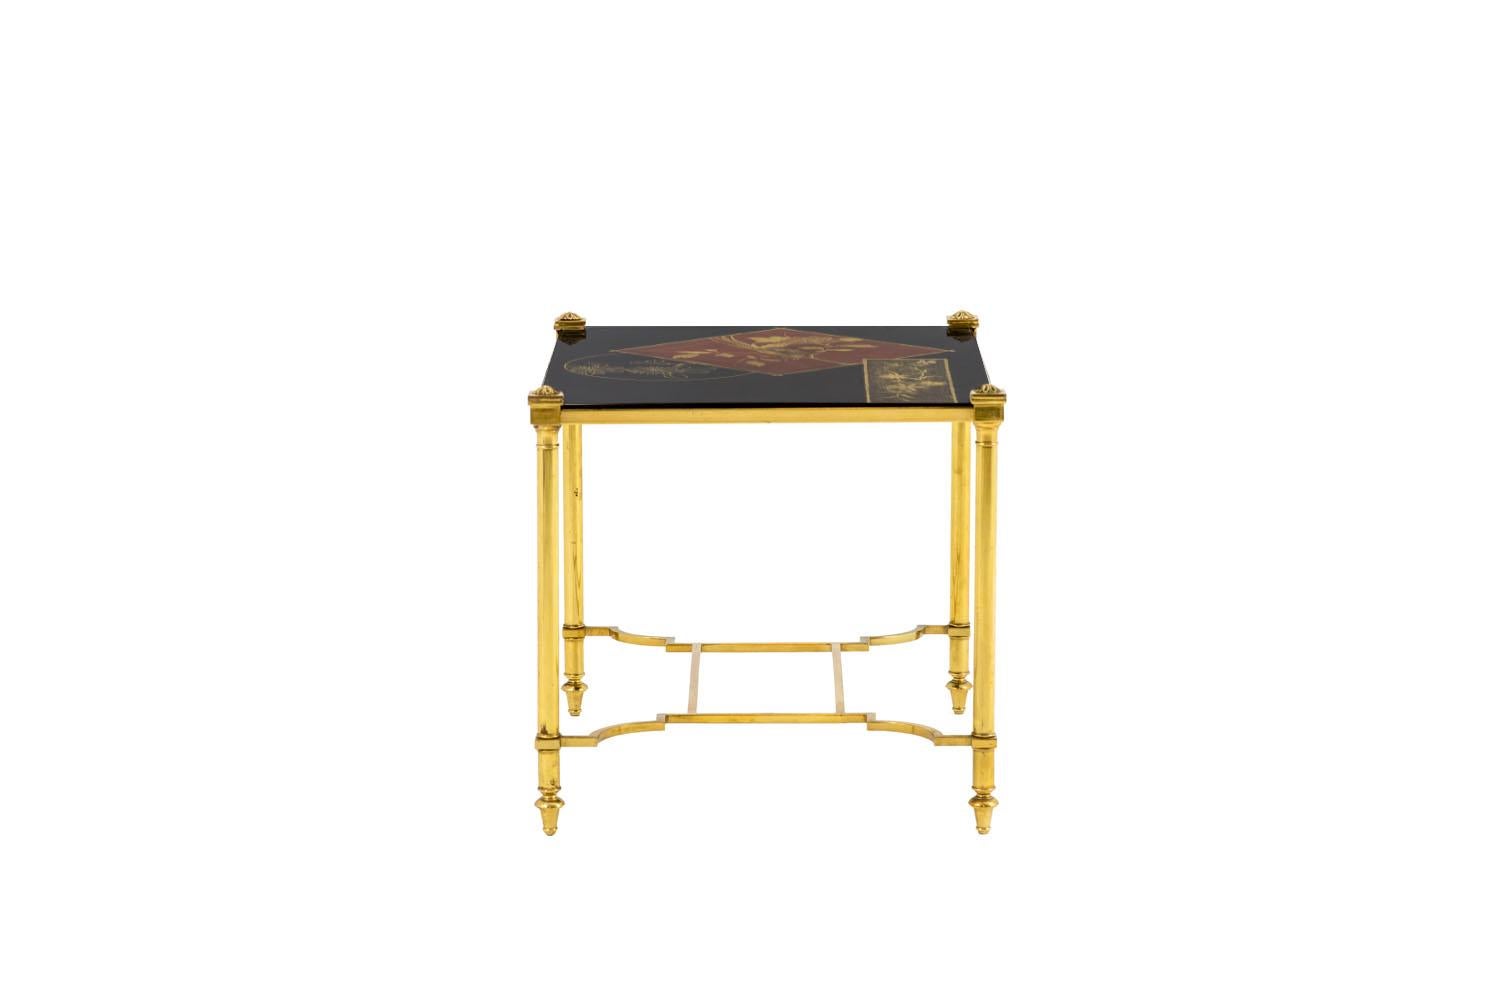 Chinese Export Pair of End Tables in Lacquer and Gilt Brass, 1970s